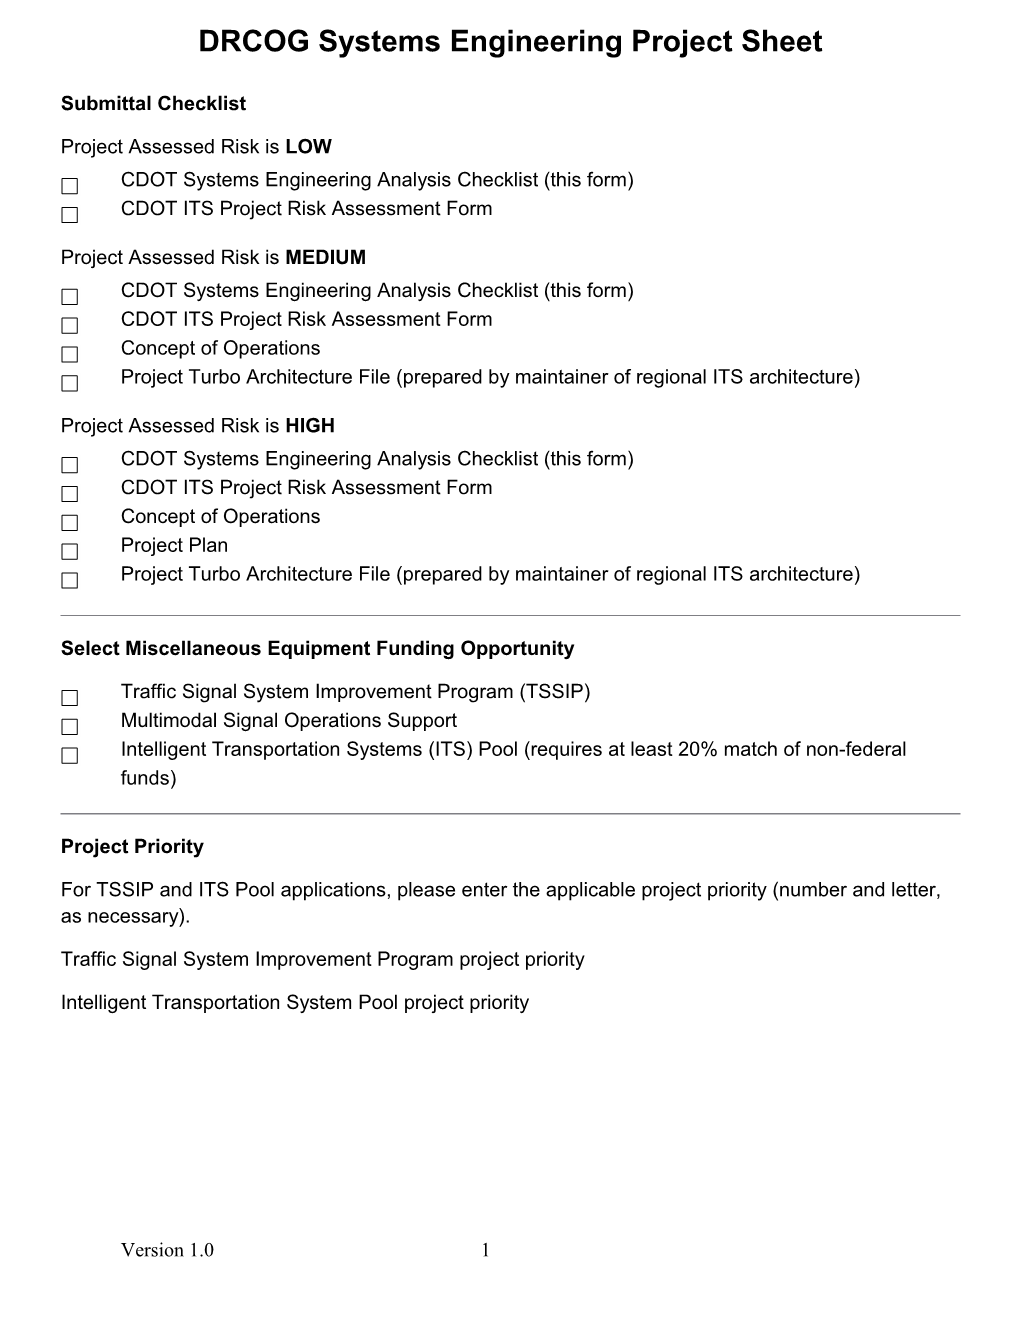 DRCOG Systems Engineering Project Sheet